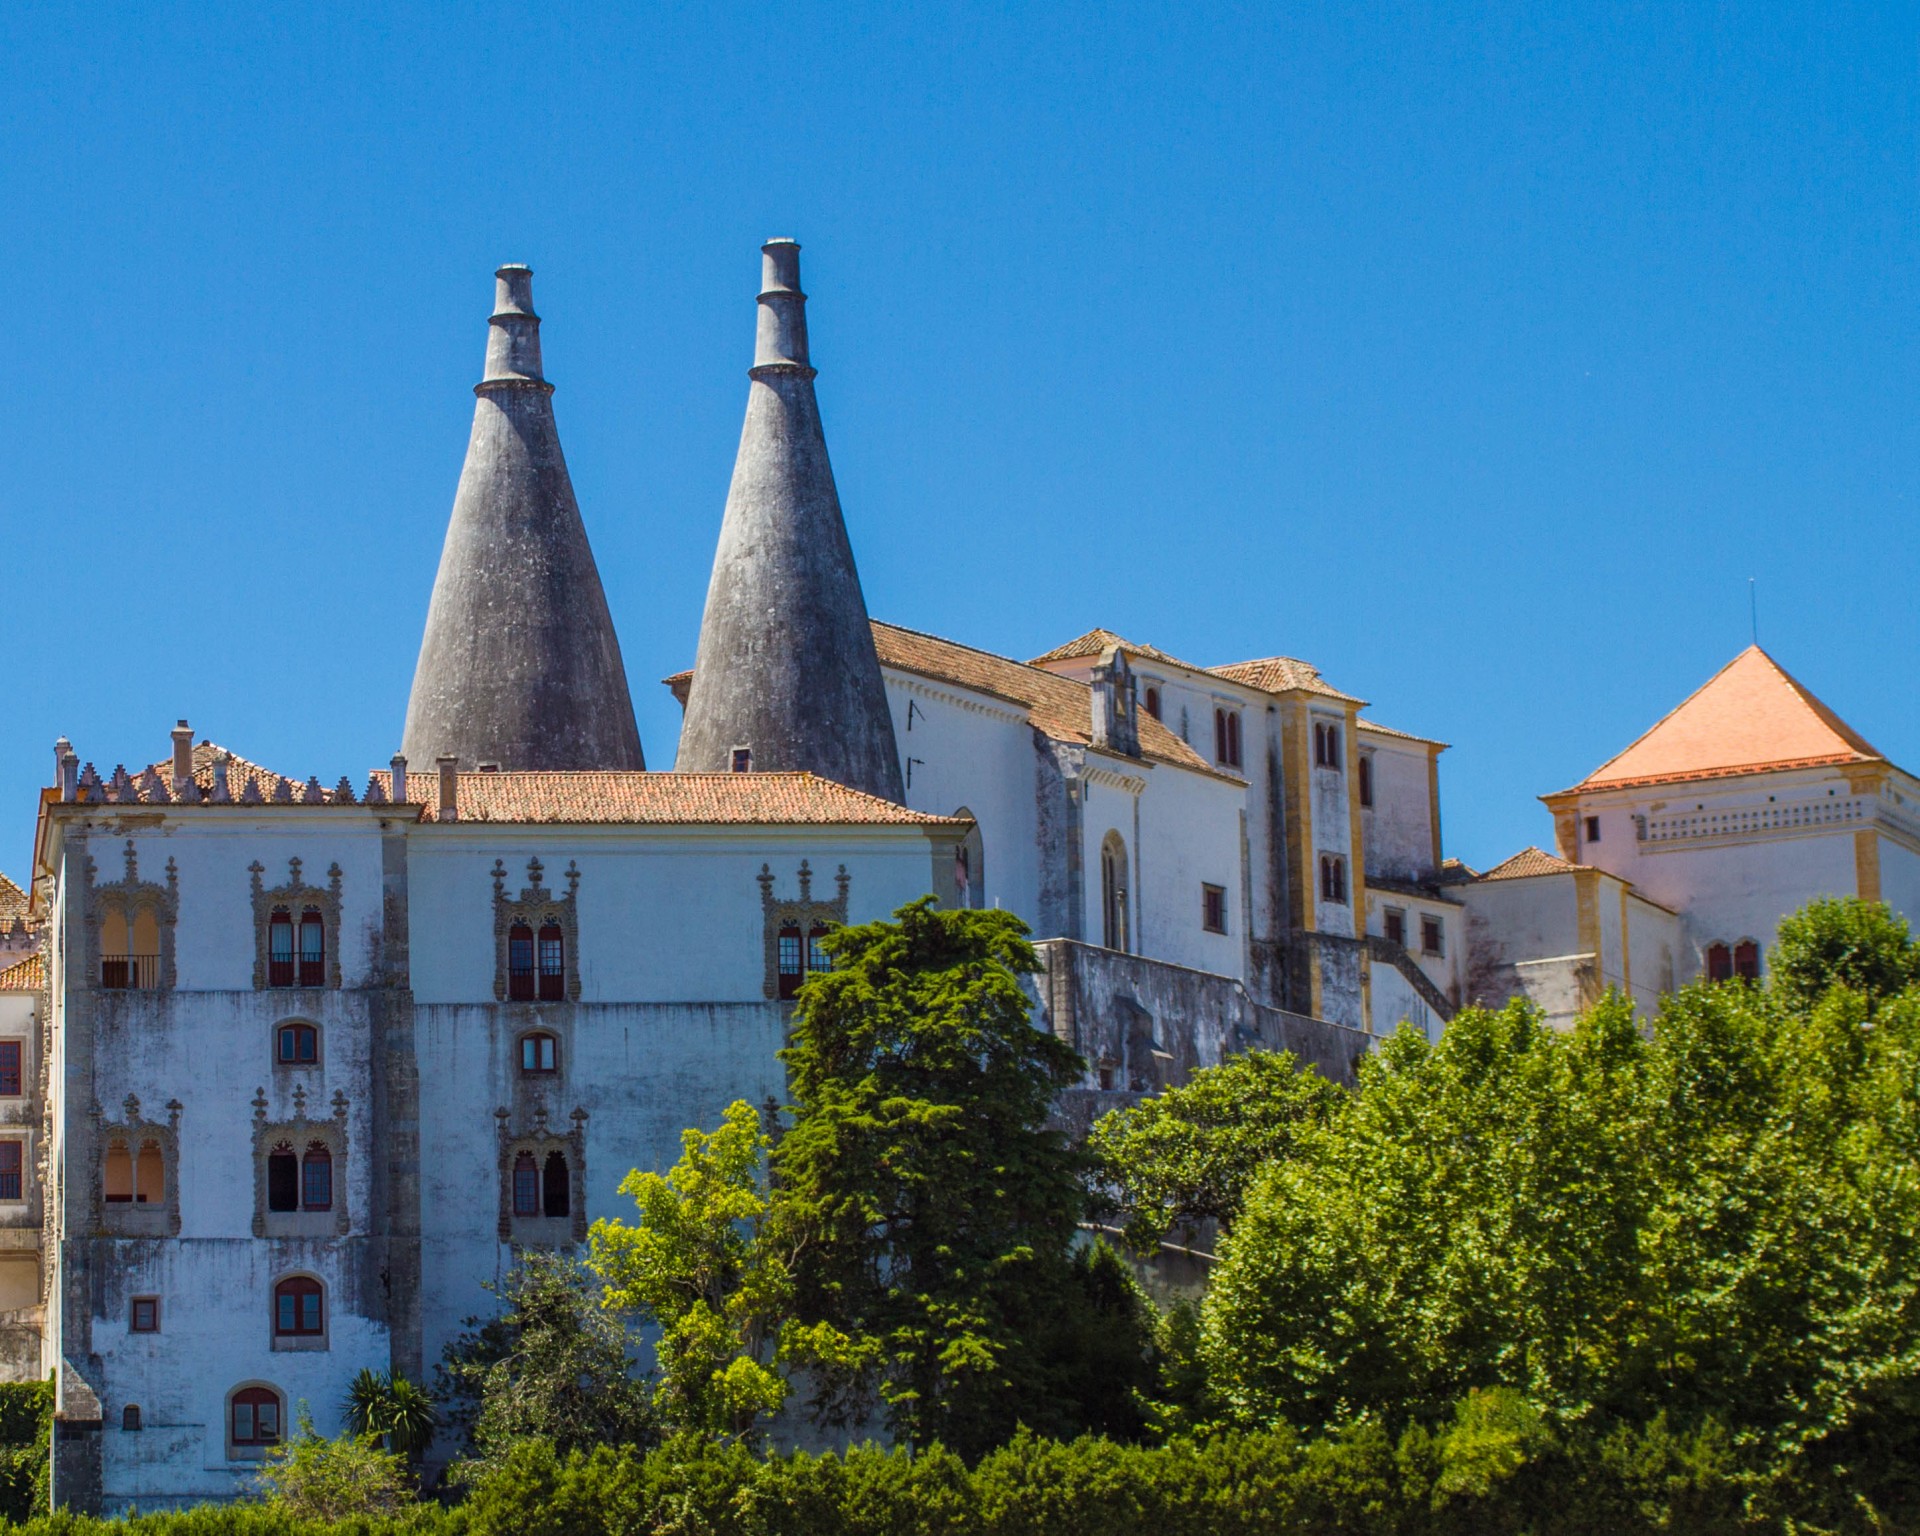 Chimney spires of Sintra, Portugals National Palace rise above the surrounding architecture